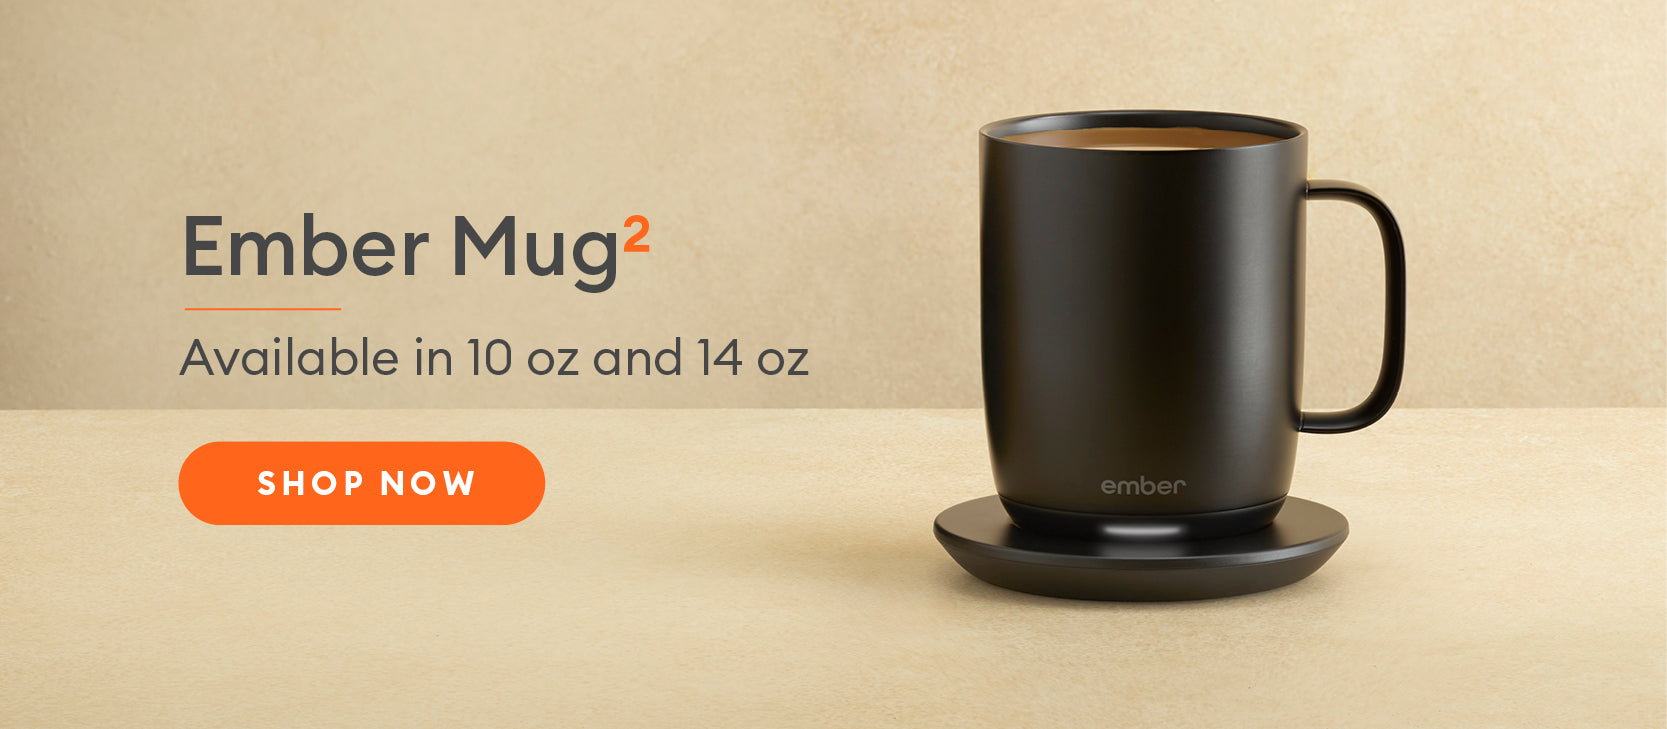 Black Ember Mug2 sits on a marble countertop. Ember Mug2 - Available in 10 oz and 14 oz. Shop Now.